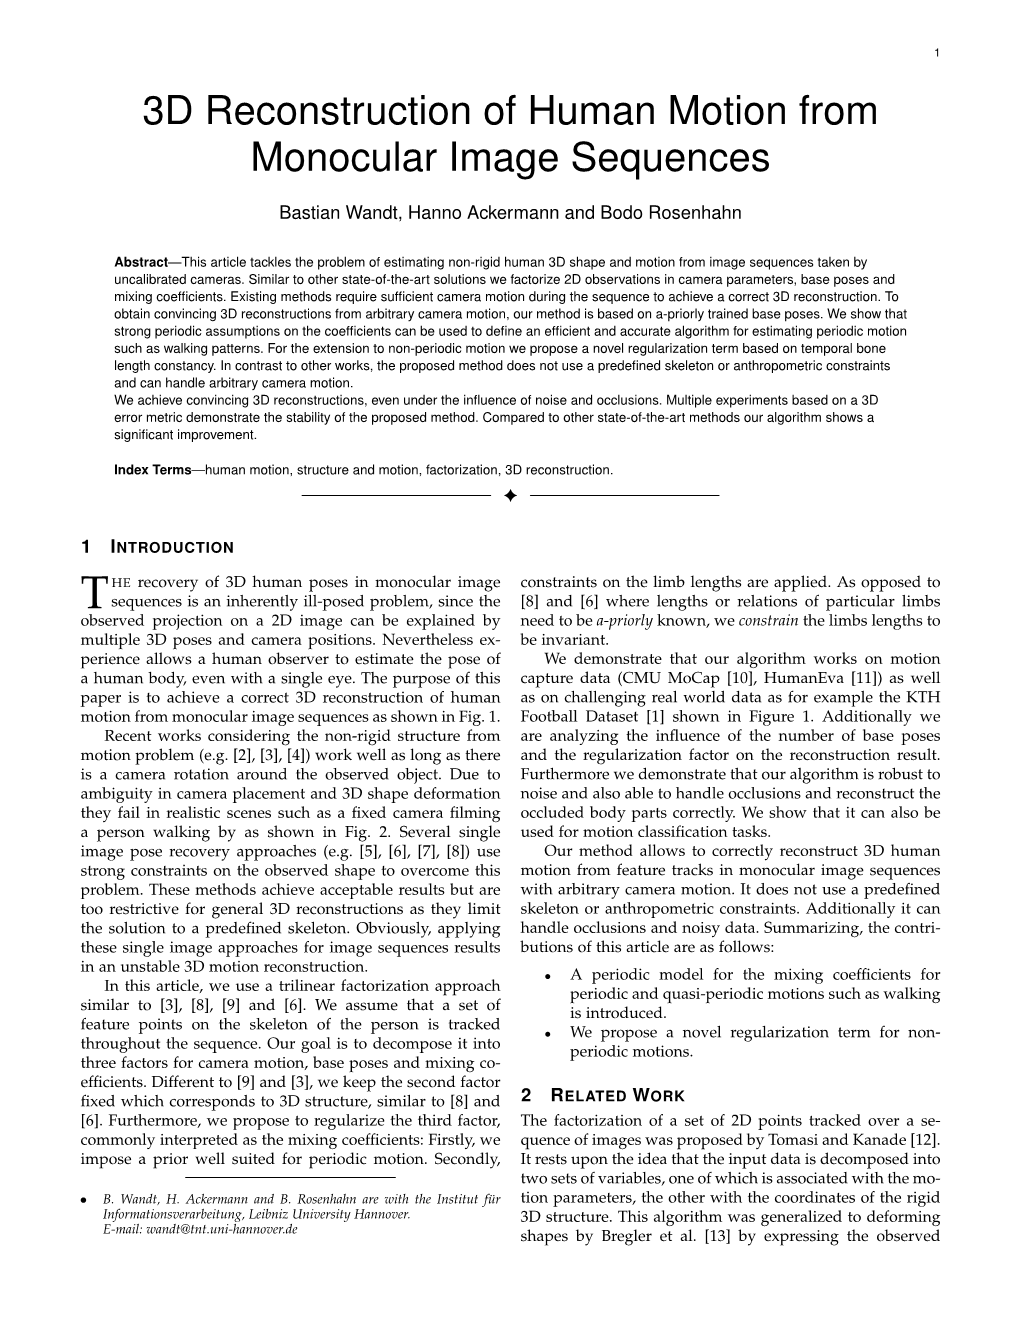 3D Reconstruction of Human Motion from Monocular Image Sequences